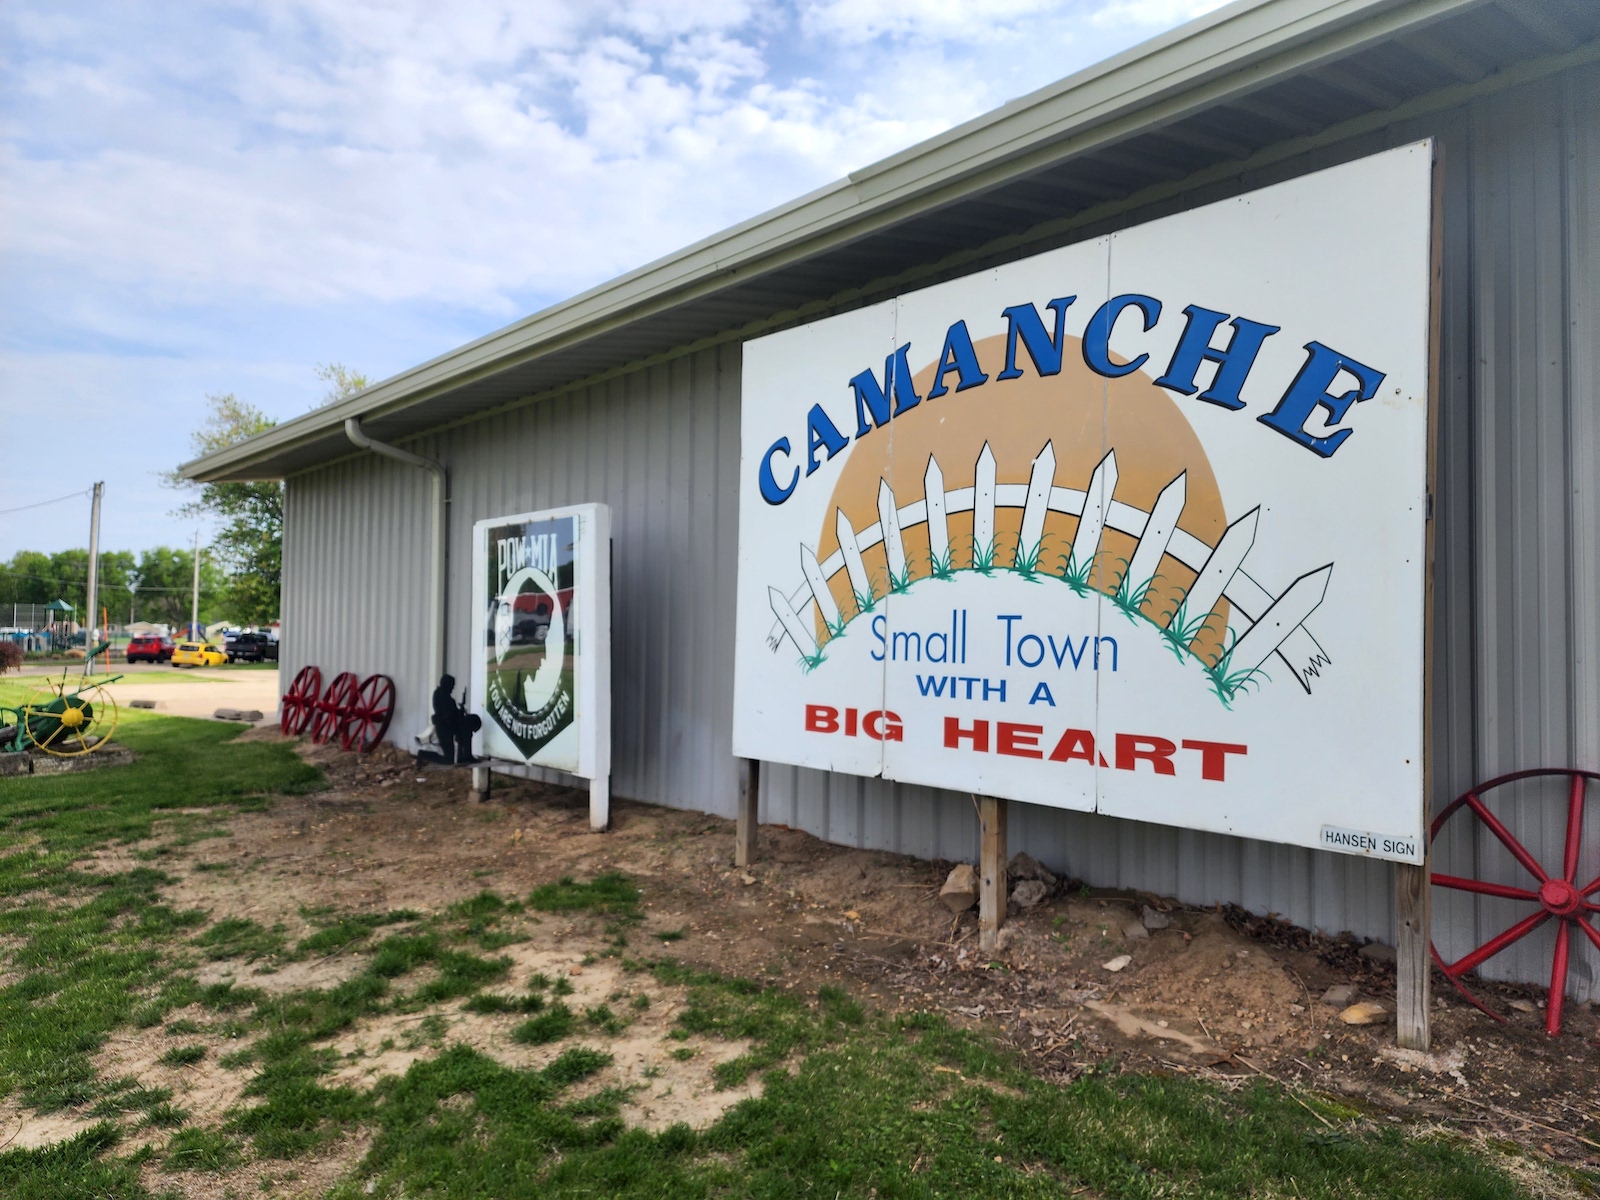 A sign says Camanche: A small town with big heart